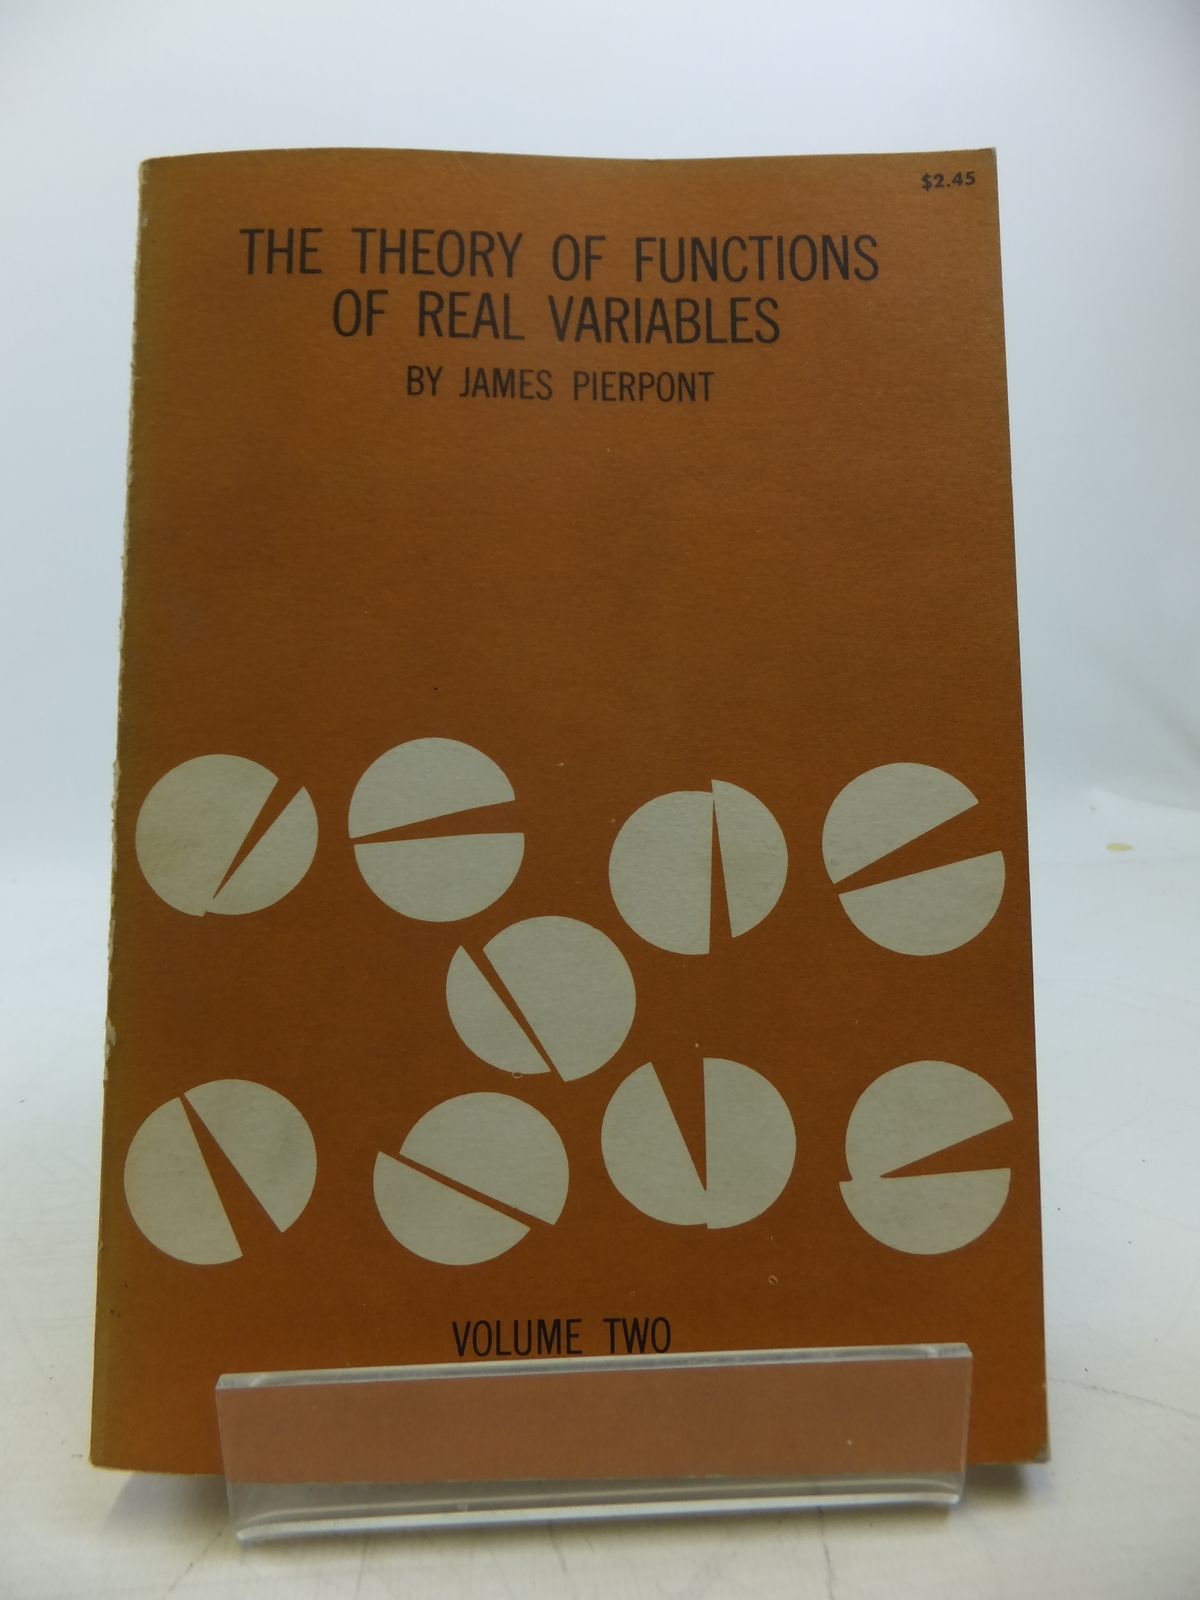 Photo of LECTURES ON THE THEORY OF FUNCTIONS OF REAL VARIABLES VOLUME II written by Pierpont, James published by Dover Publications Inc. (STOCK CODE: 1811418)  for sale by Stella & Rose's Books